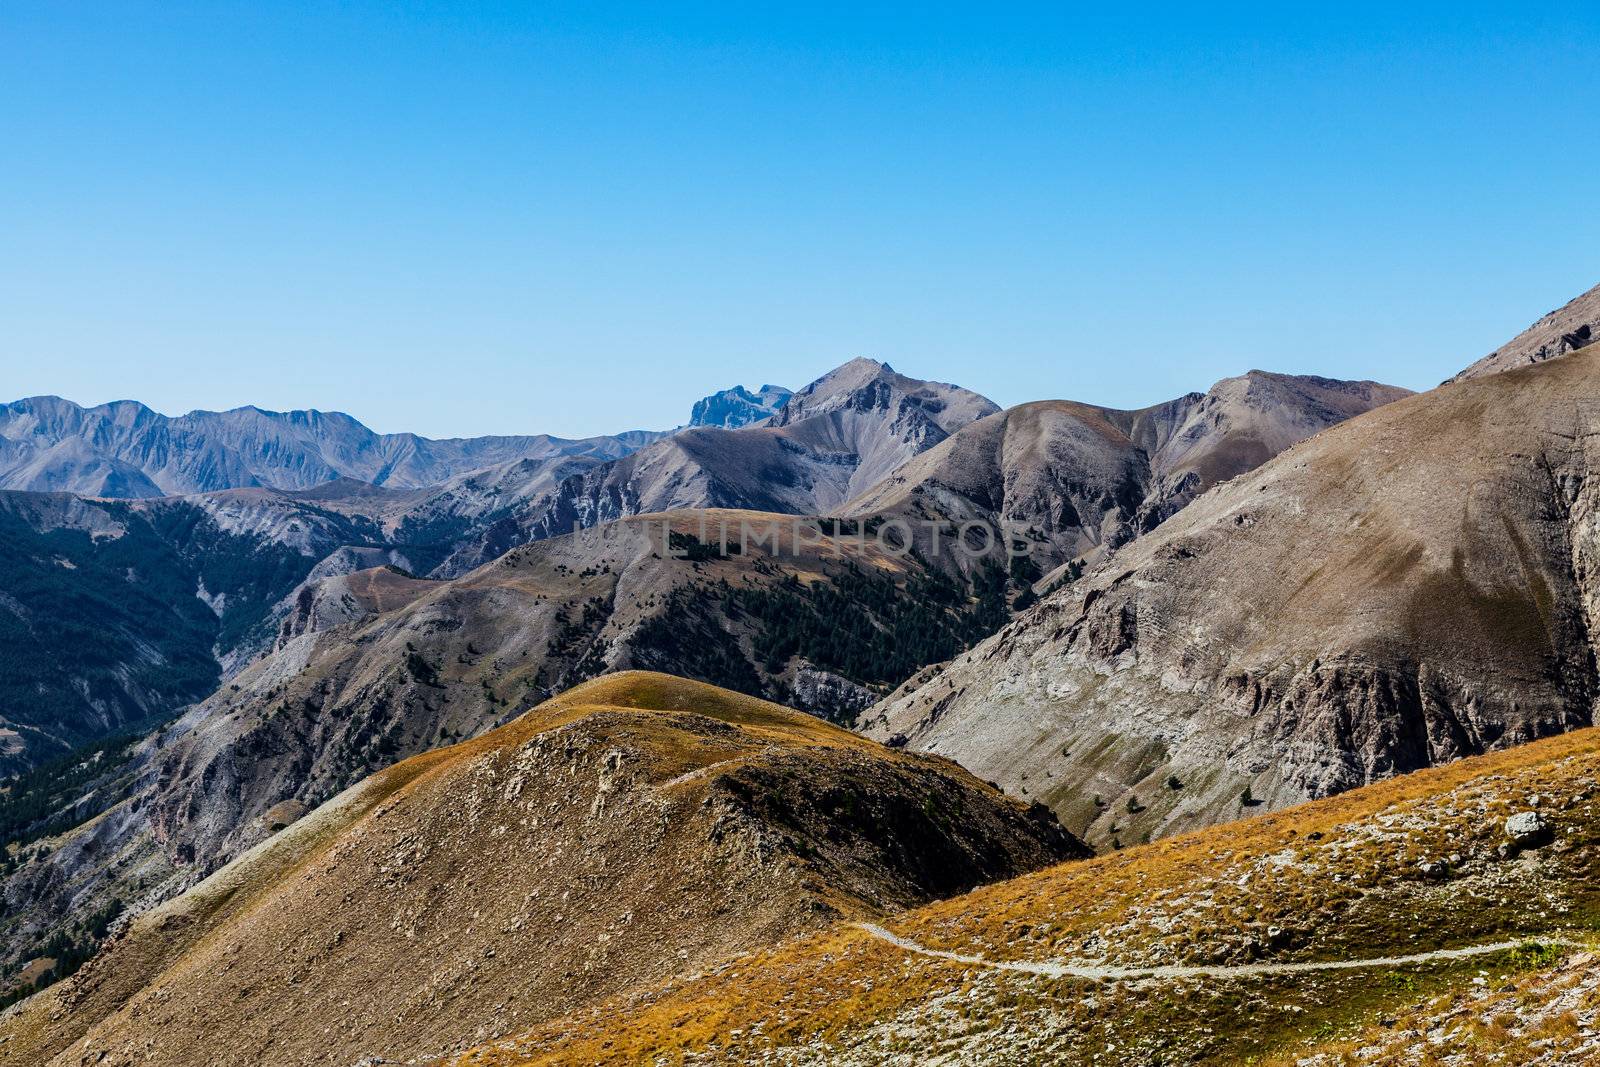 Beautiful landscape at high altitude in the Southern Franch Alps with a small footpath in the bottom of the image.